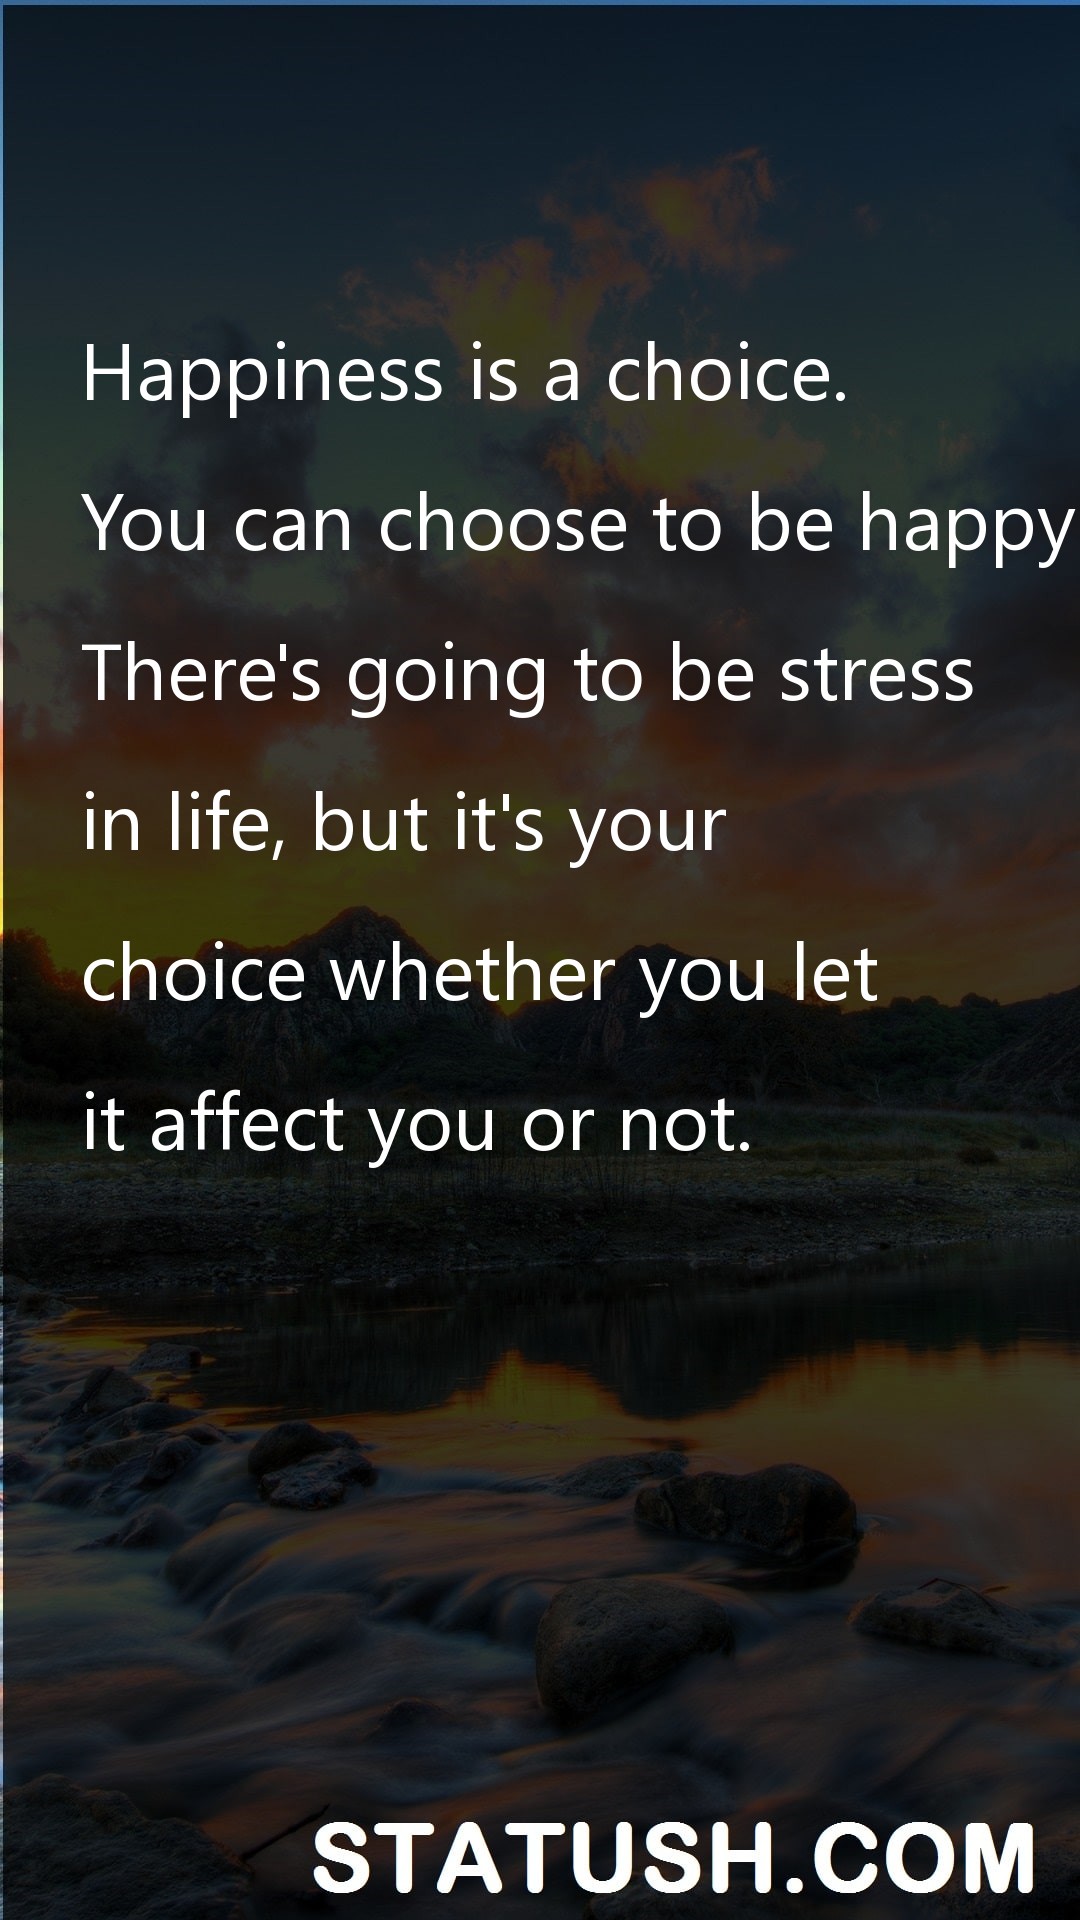 Happiness is a choice - Life Quotes at statush.com